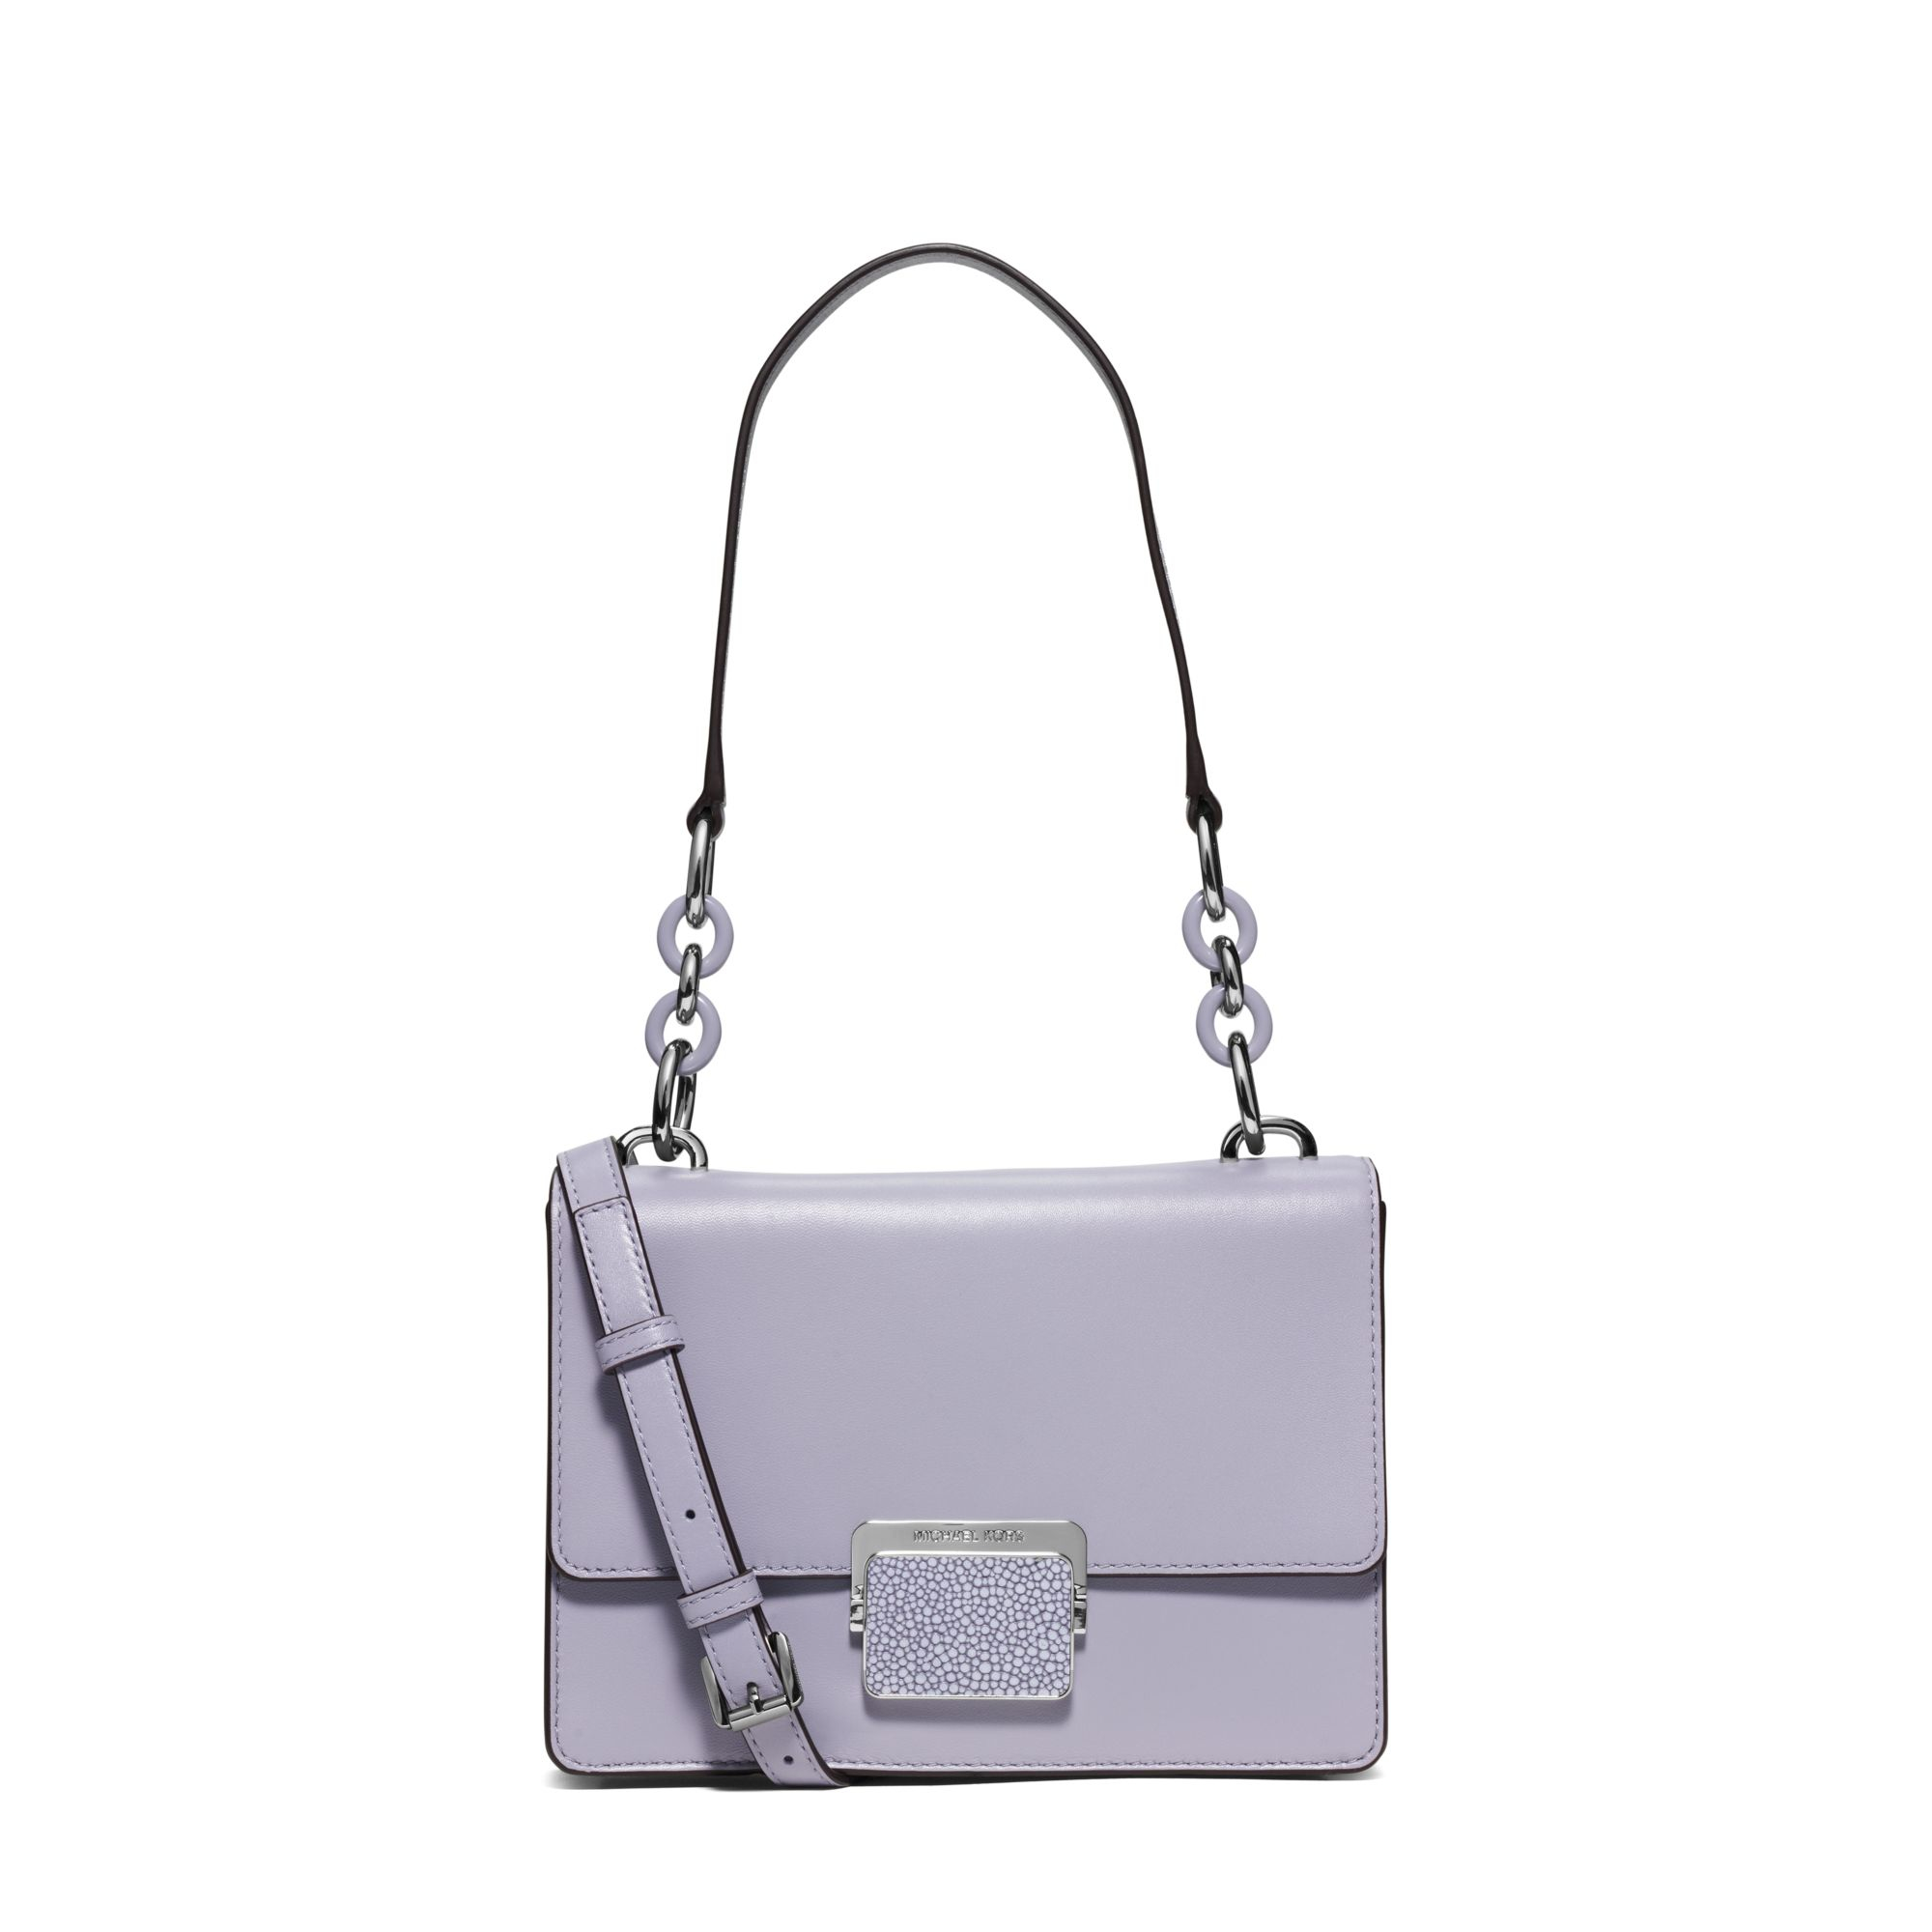 Michael kors Cynthia Small Leather Shoulder Bag in Purple | Lyst